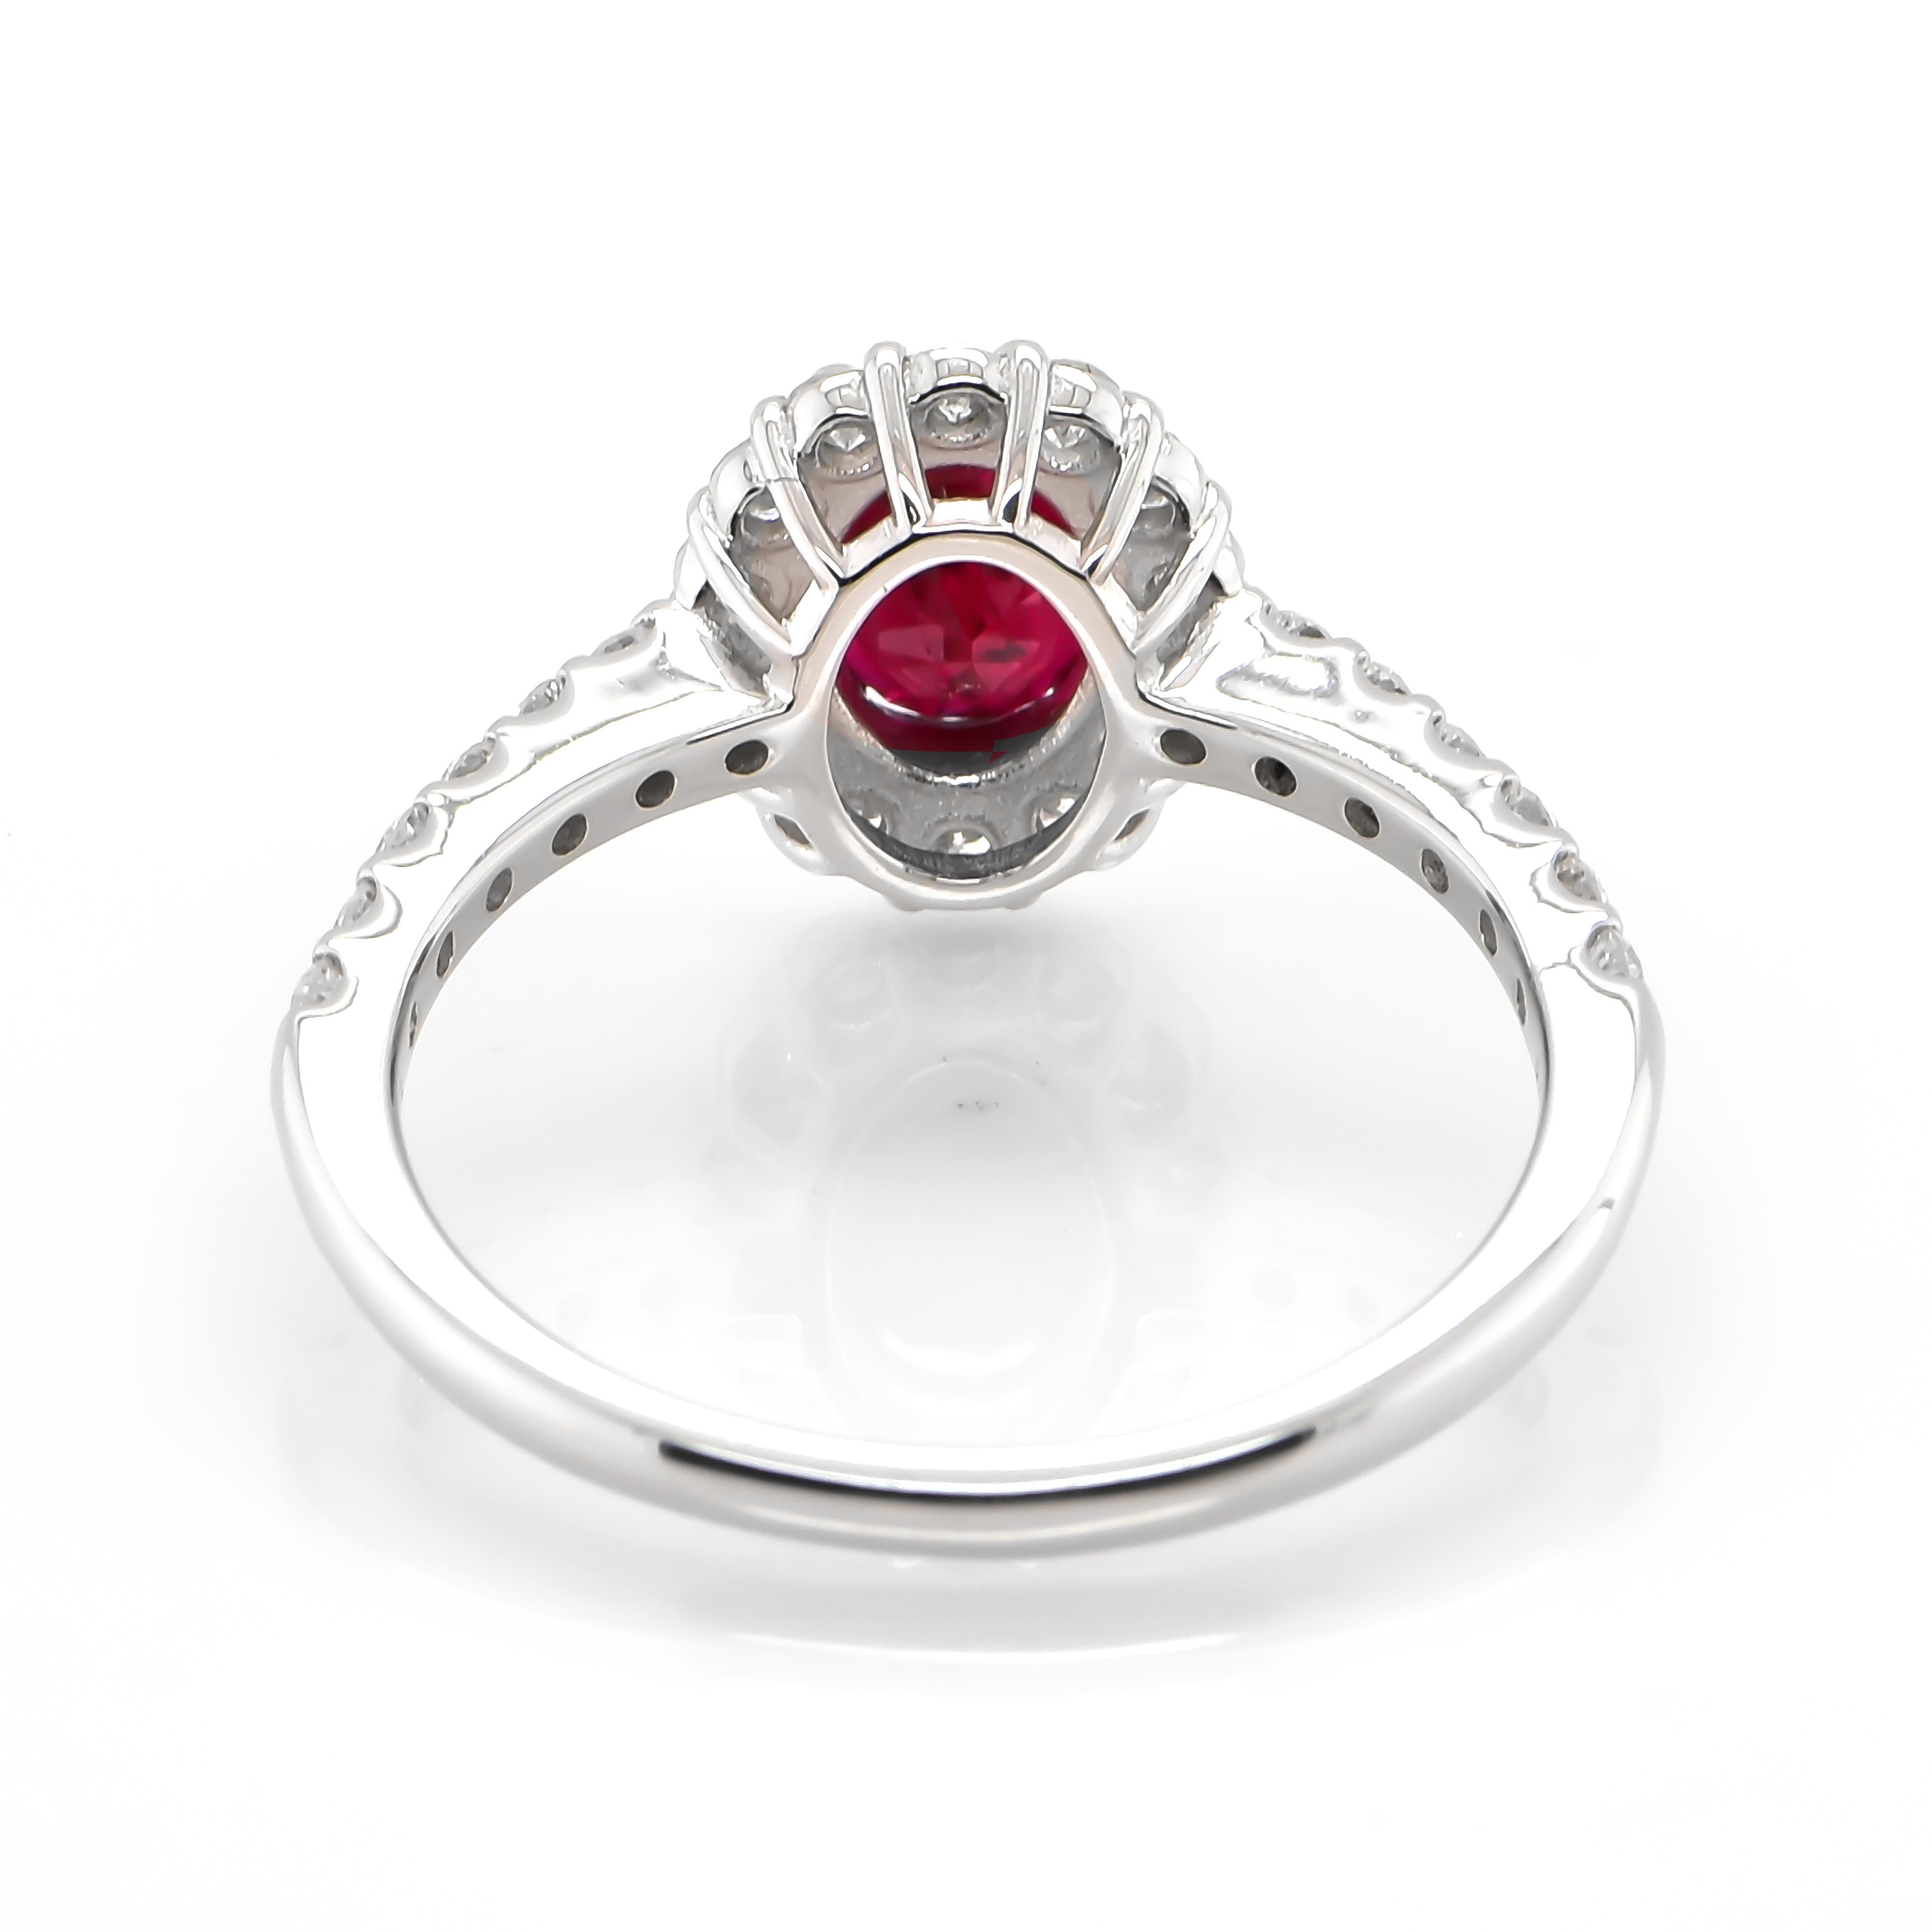 Women's GIA Certified 1.16 Carat, No Heat, Blood Red, Burmese Ruby Ring Made in Platinum For Sale